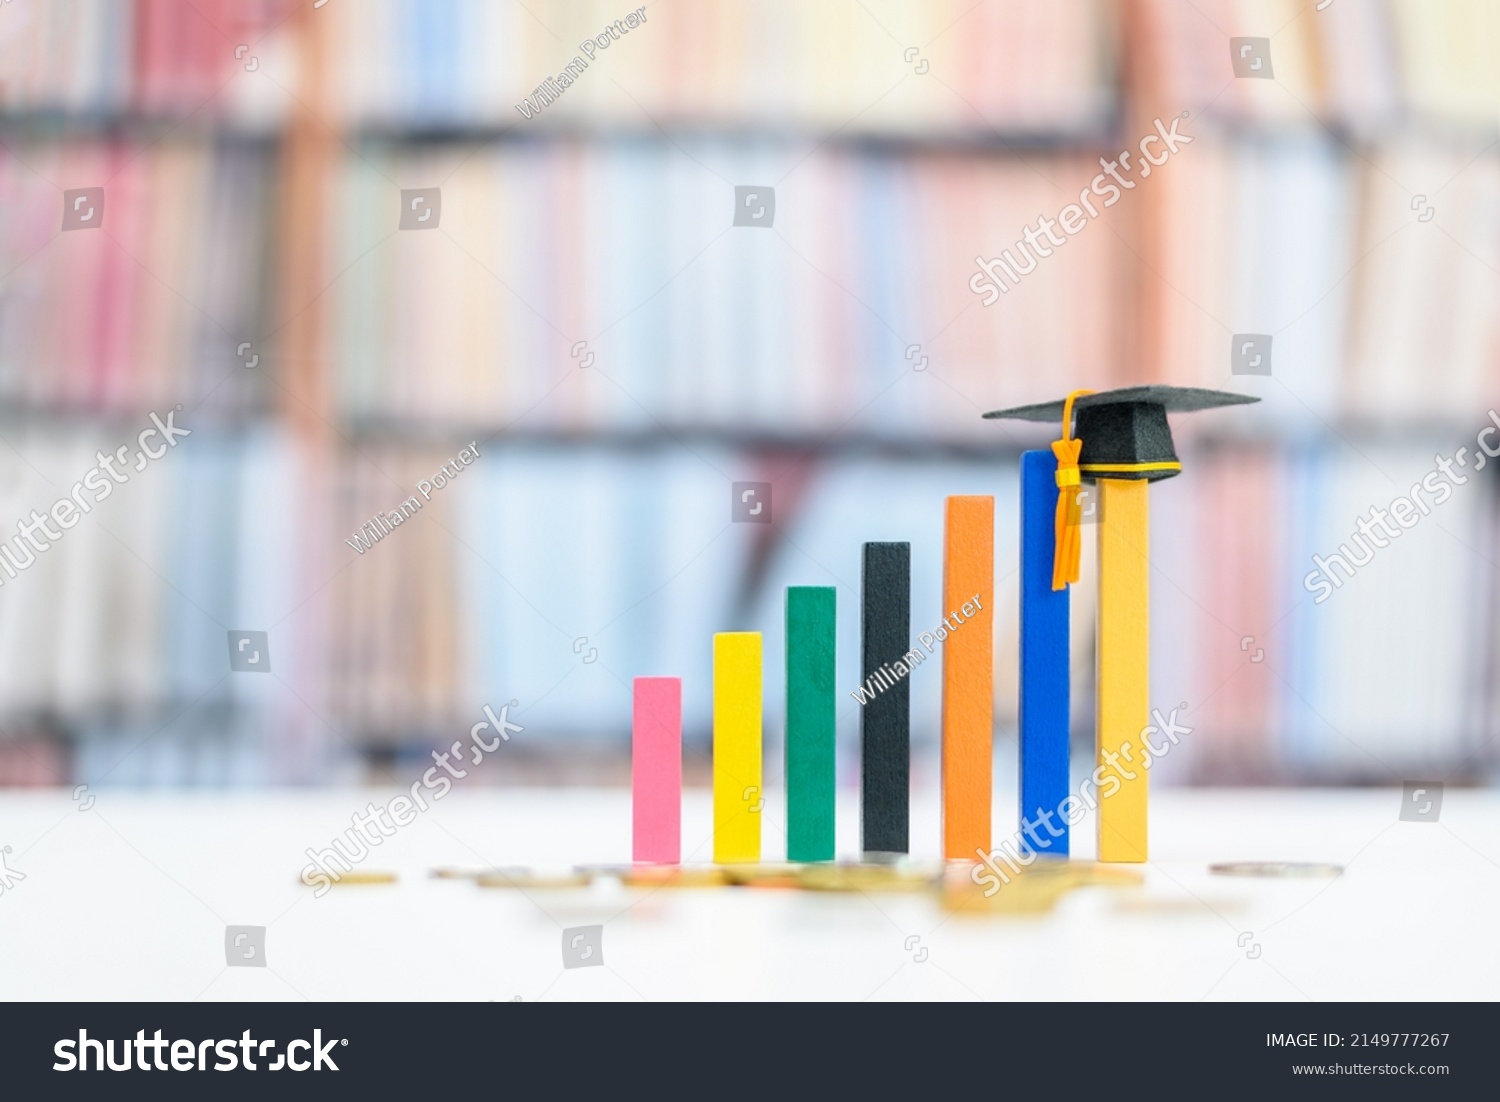 Graduate study abroad program for higher degree knowledge, education concept : Black graduation cap on increasing bar graph, depicting strong effort for students who study hard for a future career. #2149777267